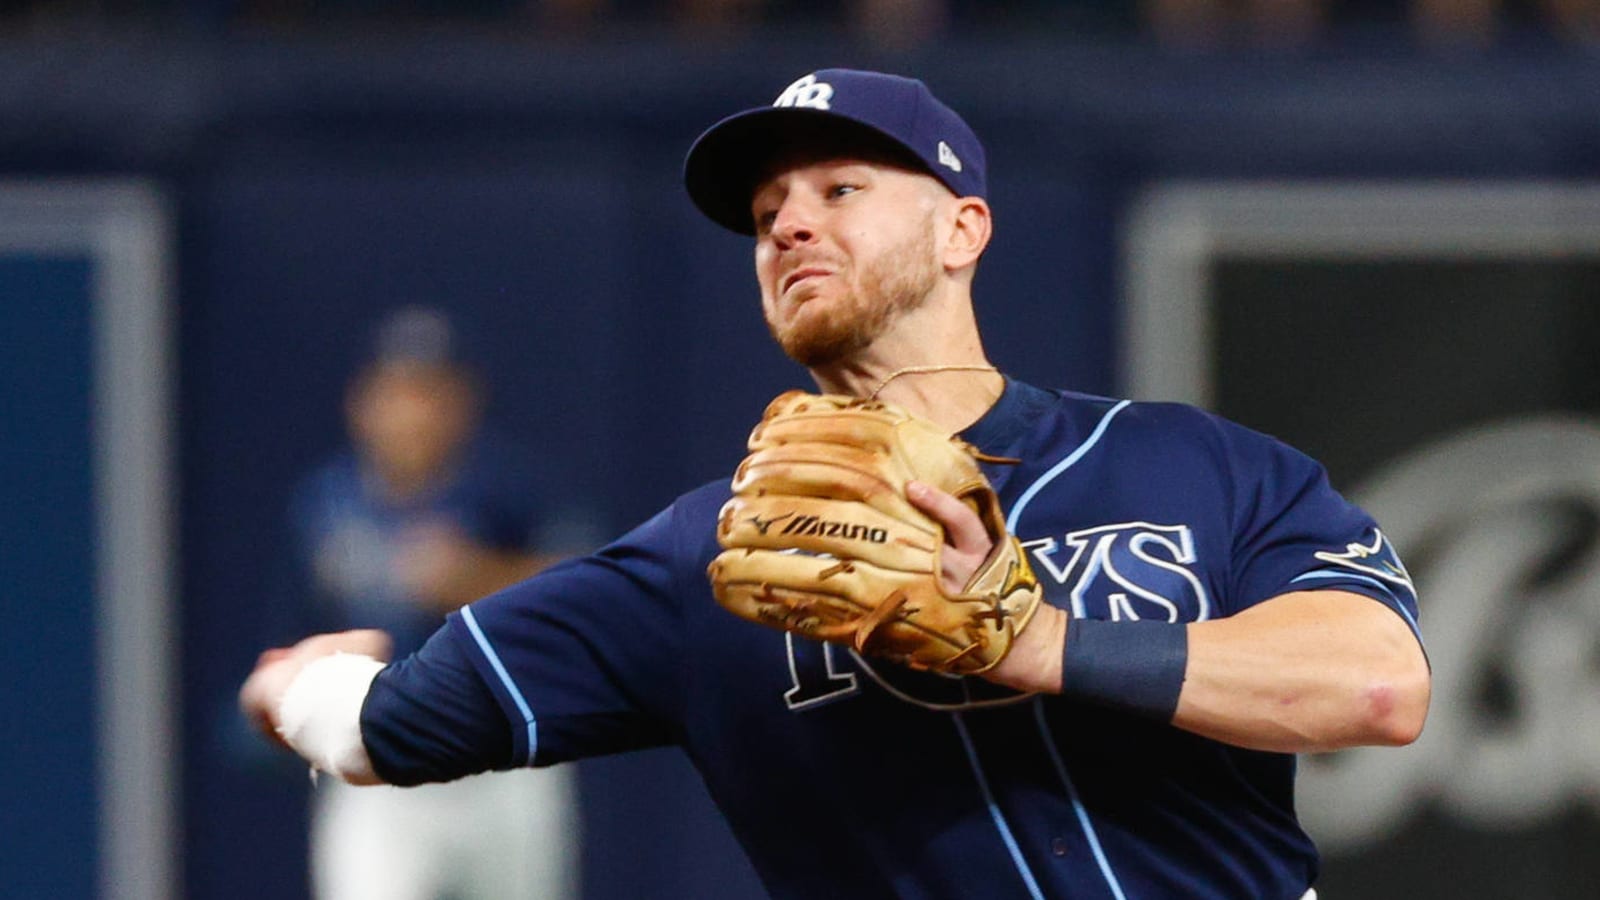 Brewers acquire veteran utilityman Mike Brosseau from Rays